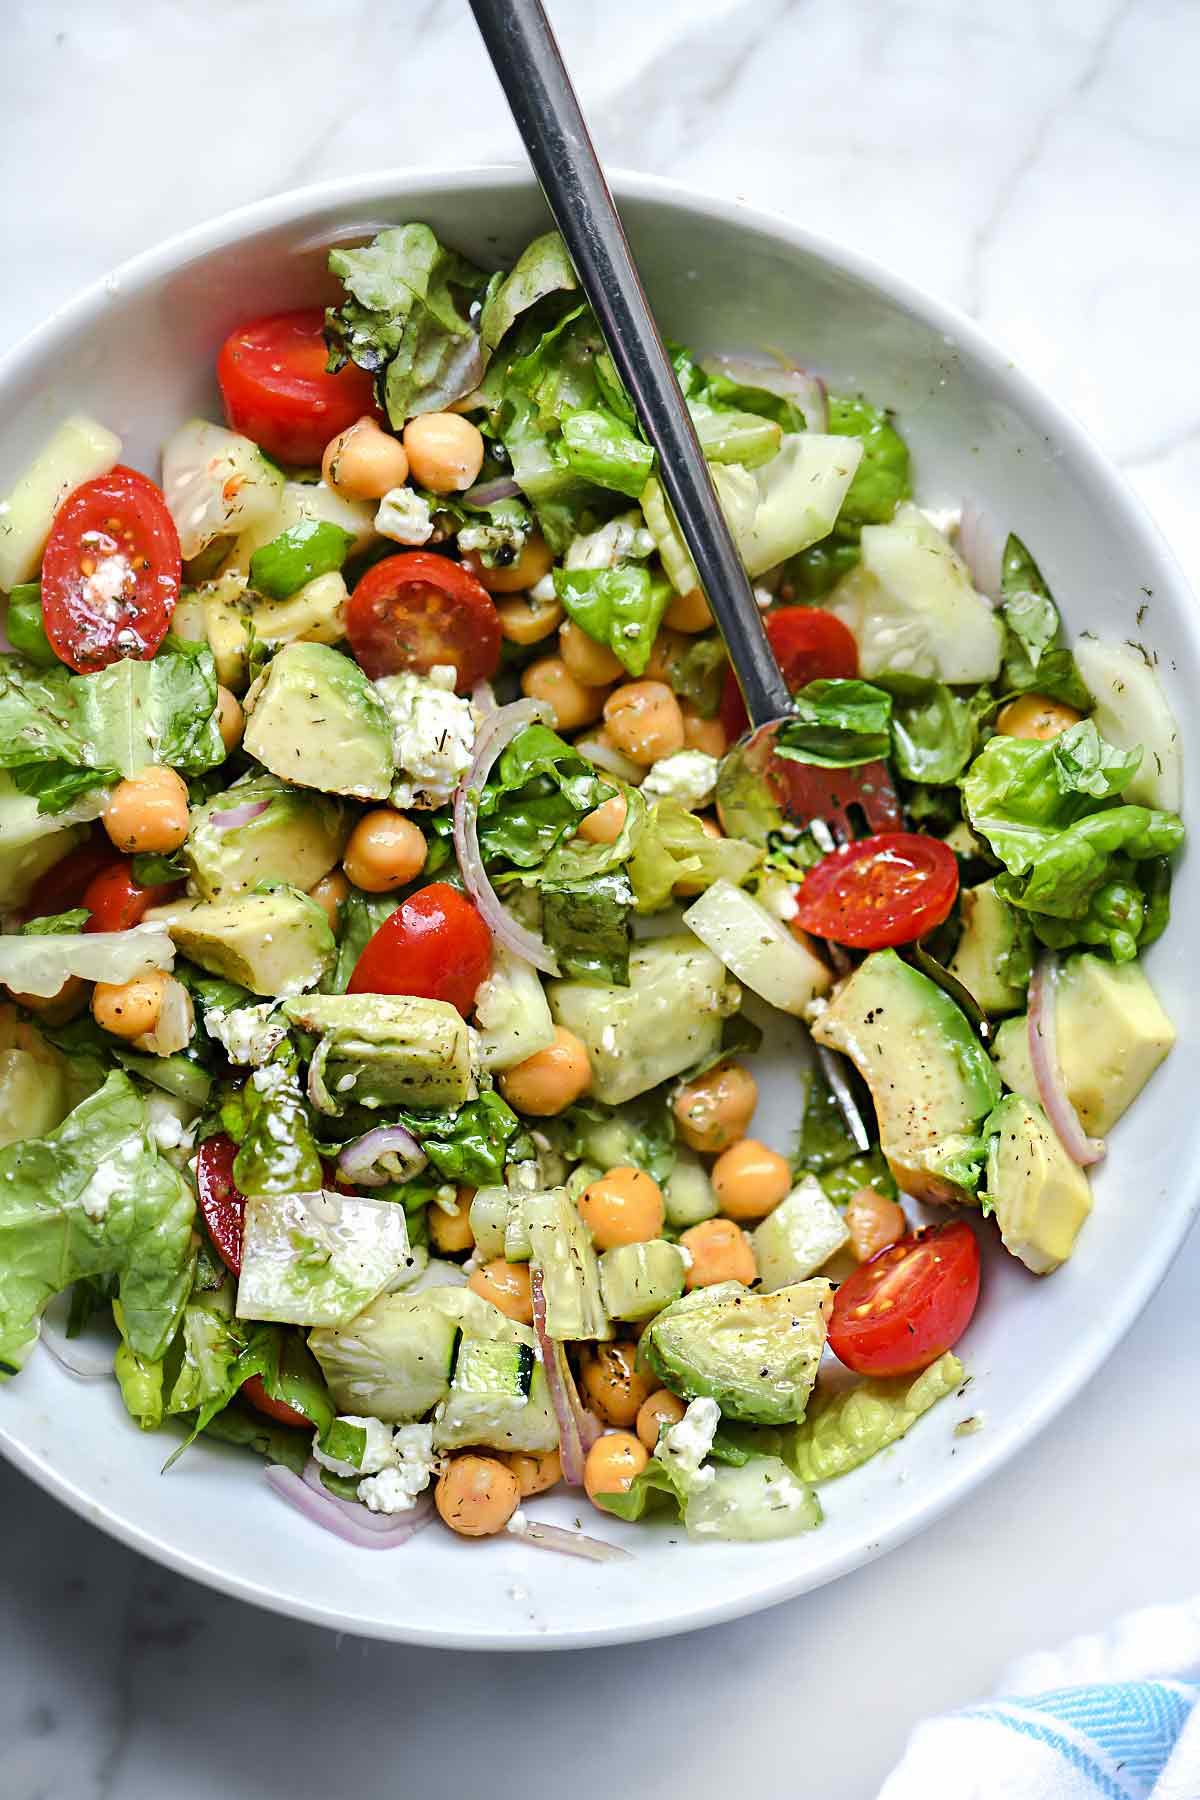 https://www.foodiecrush.com/wp-content/uploads/2018/03/Green-Salad-with-Dilly-Chickpeas-and-Avocado-foodiecrush.com-011.jpg